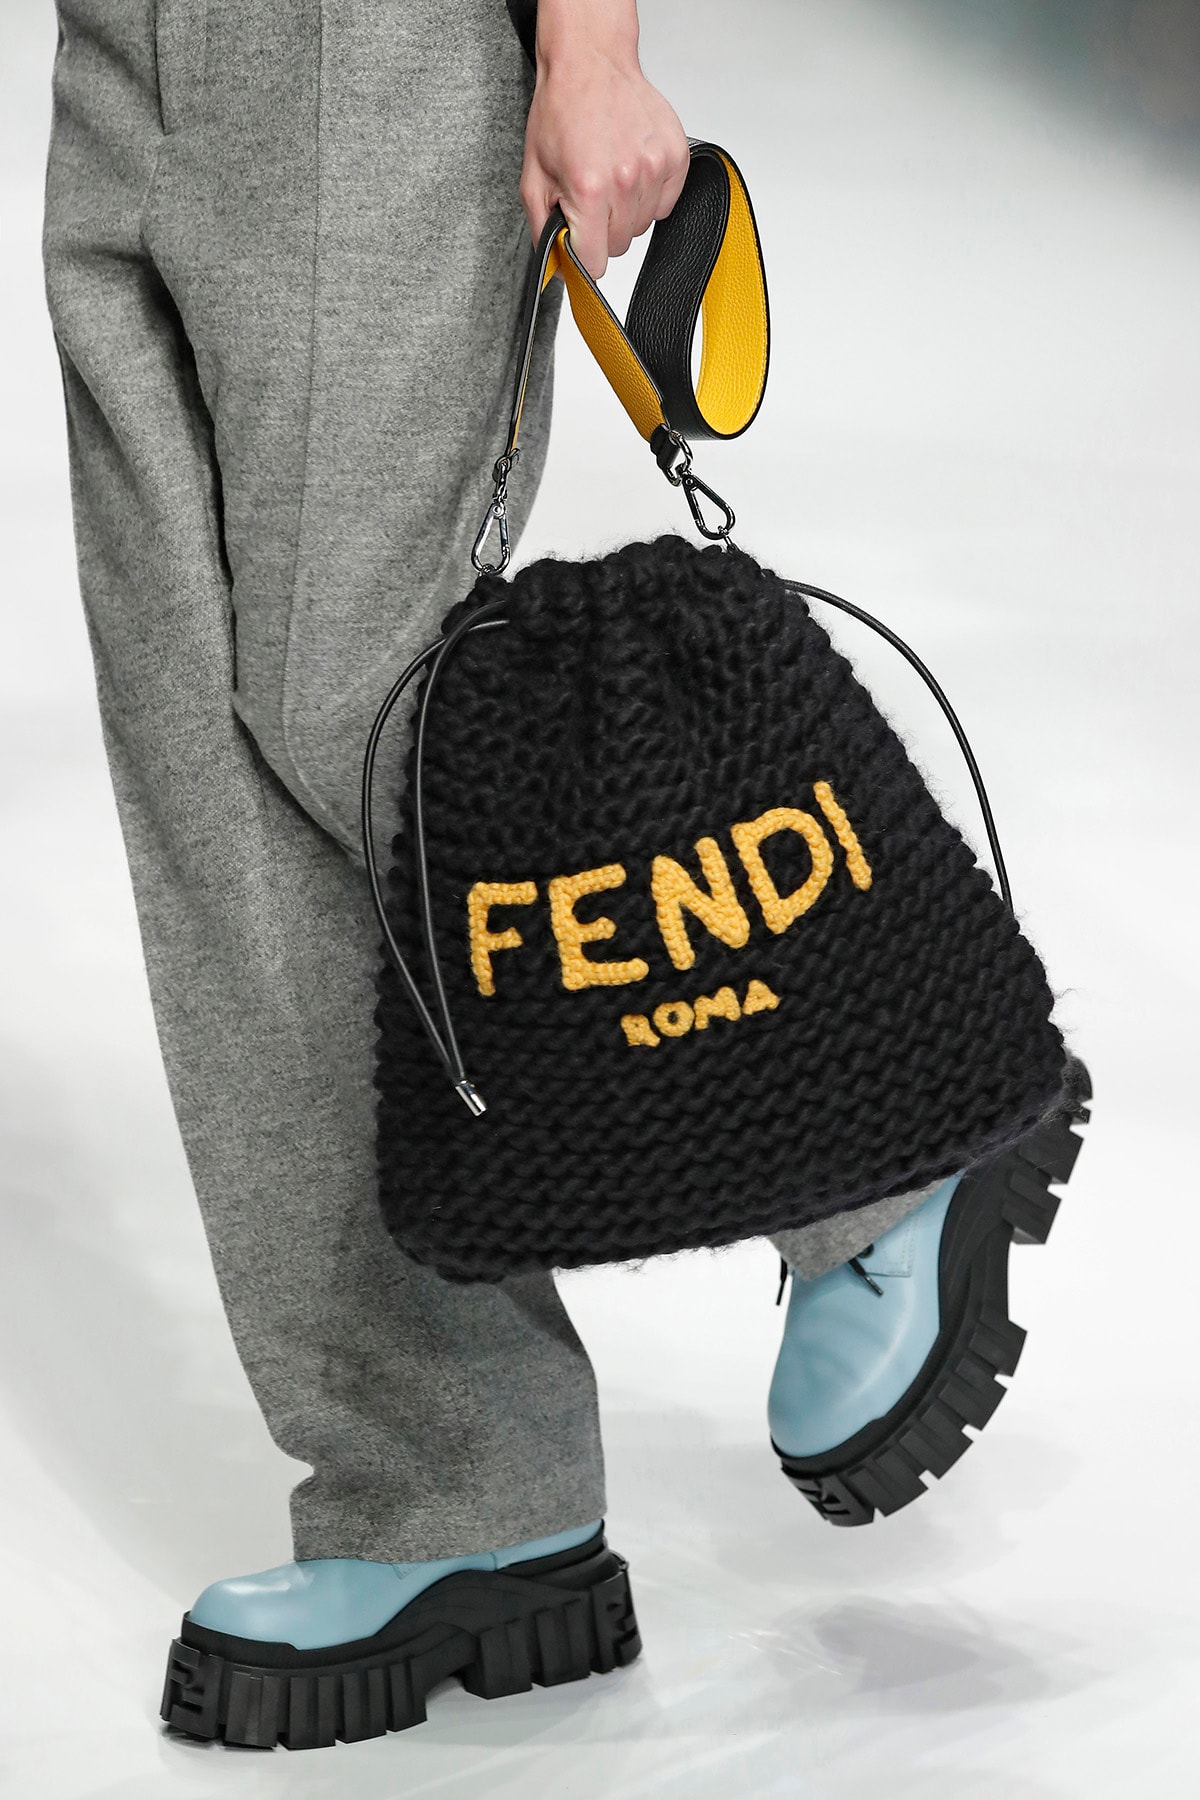 Fendi Fall/Winter 2020 Collection Bags Drawstring Knit